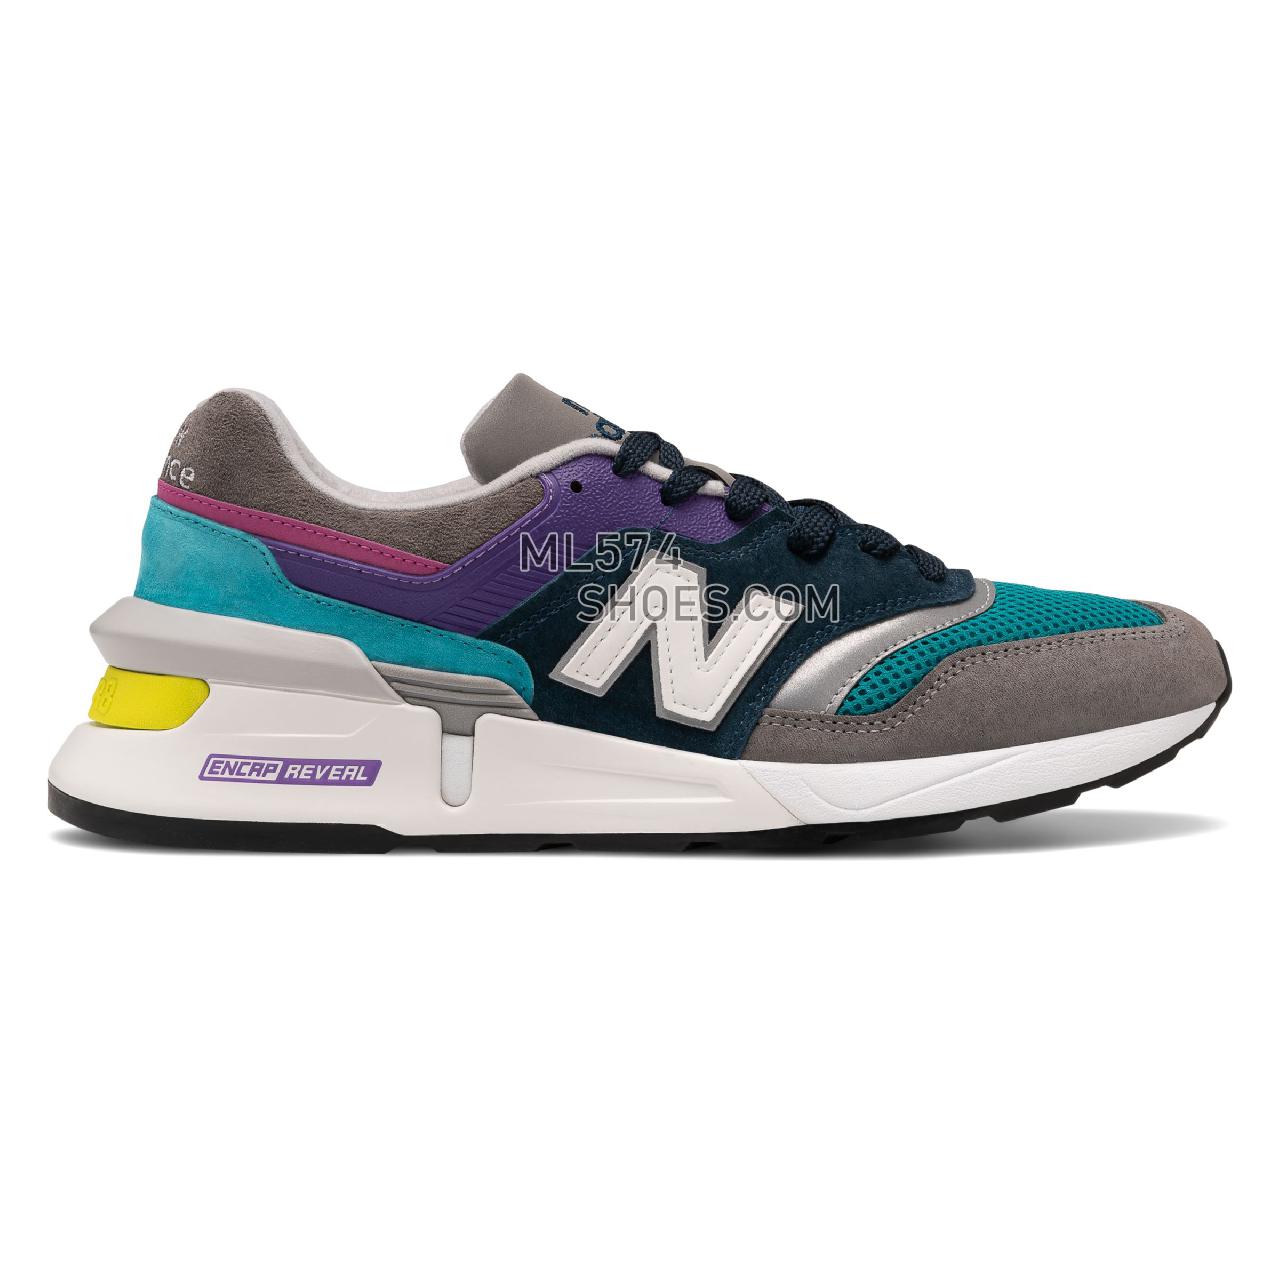 New Balance 997S - Men's 997S Classic - Grey with Blue - M997SMG